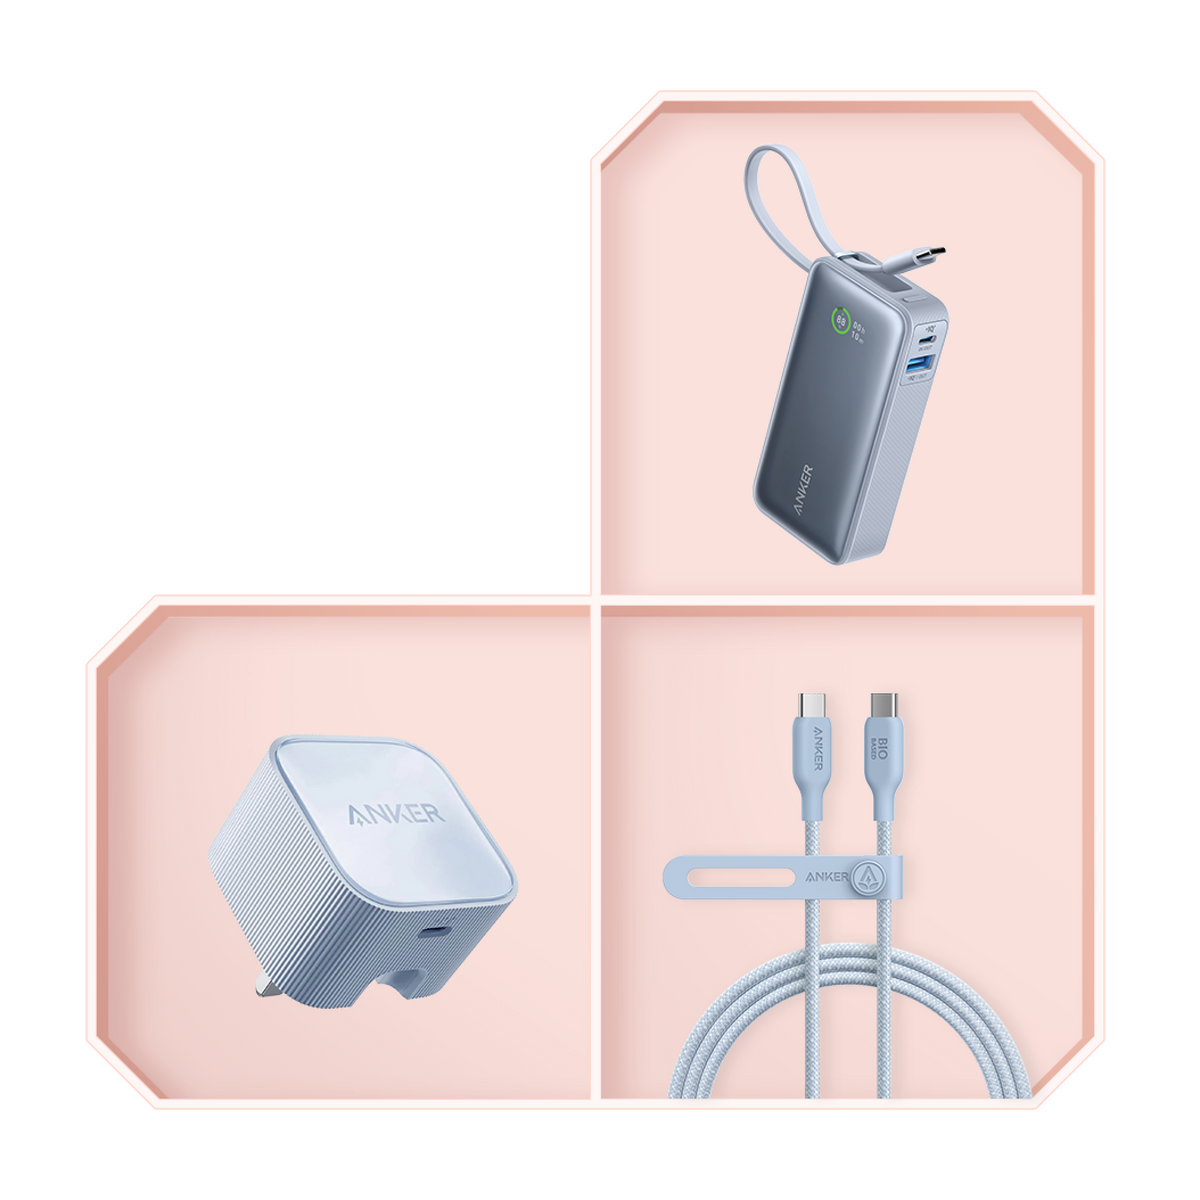 Anker Nano Power Bank, USB-C Wall Charger, and USB-C to USB-C Cable